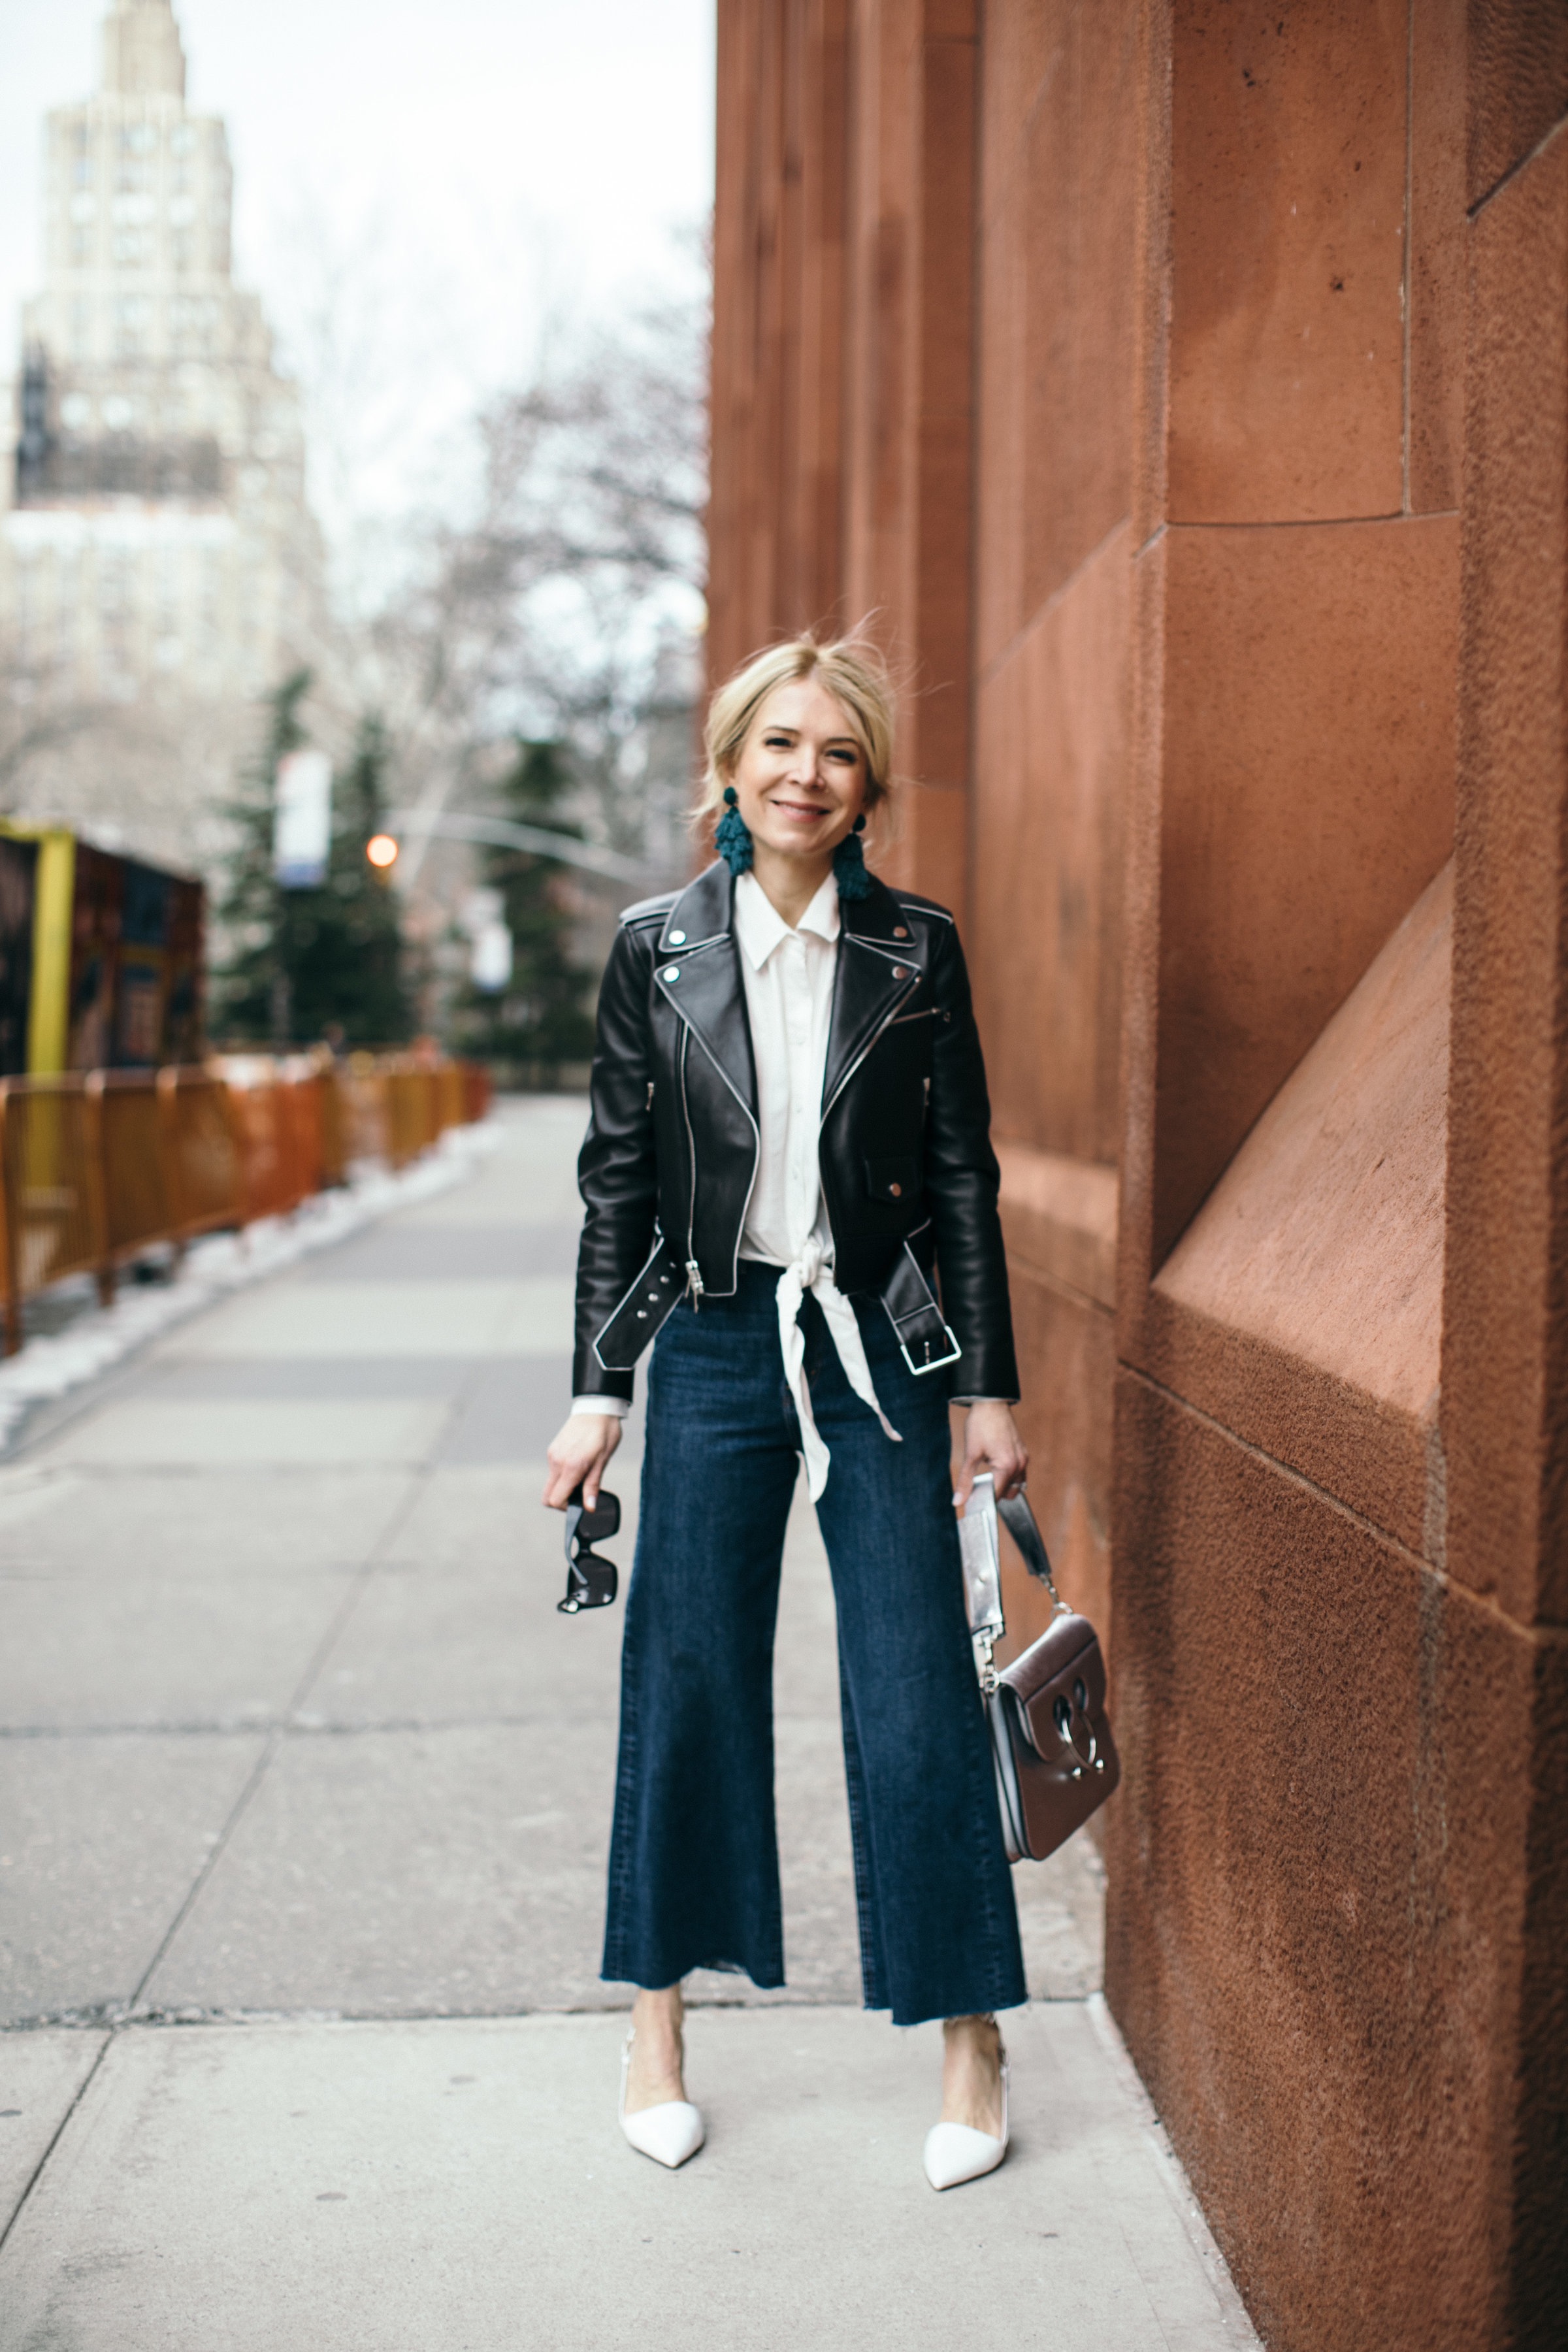 The always classic biker jacket | About The Outfits